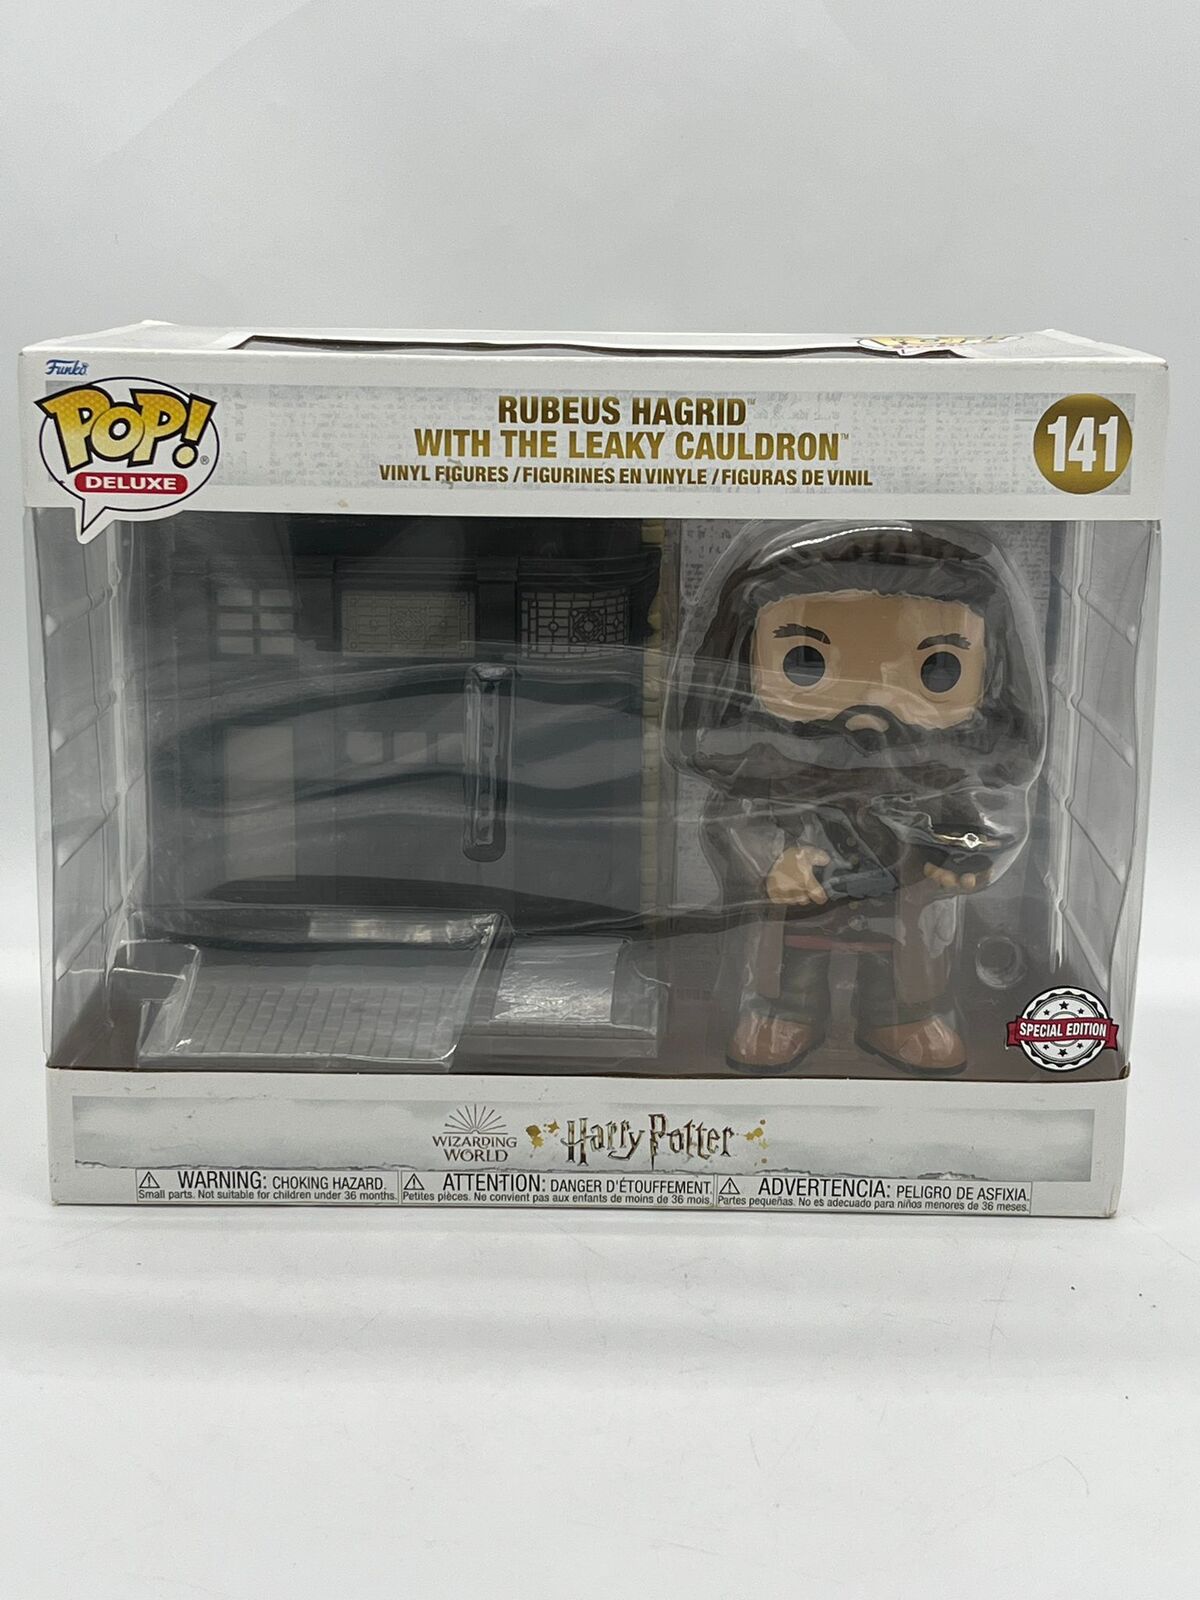 Funko POP! Harry Potter Deluxe Rubeus Hagrid with the Leaky